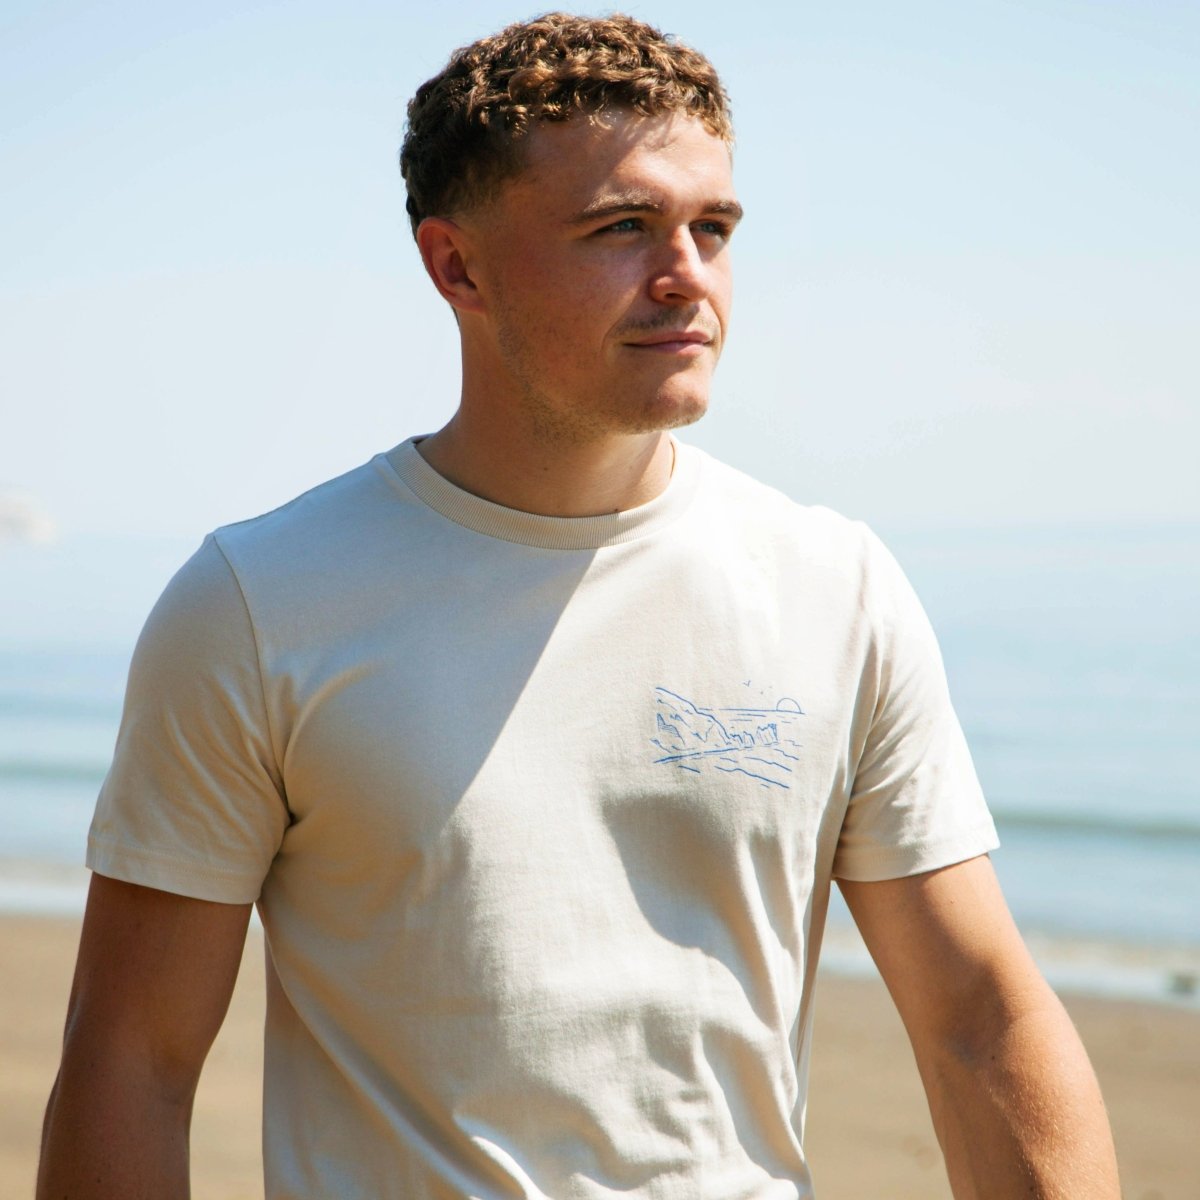 Across The Solent T - Shirt - Printed T - shirt